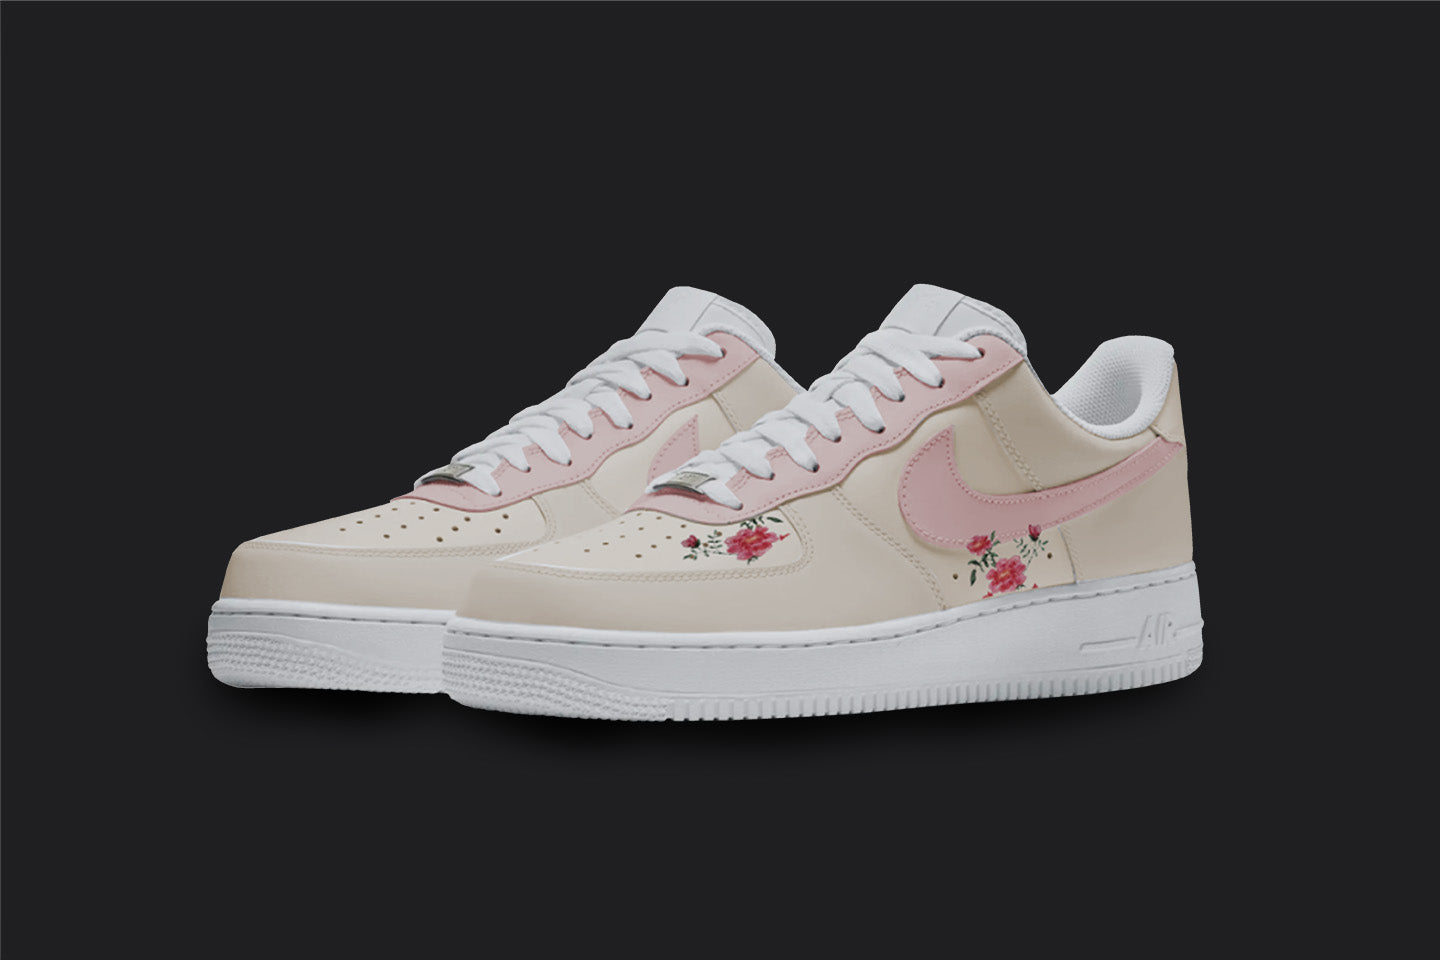 The image is of a Custom Nike Air force 1 sneaker pair on a blank black background. The white custom sneakers have a Pink nike logo with floral illustrations on the sides.